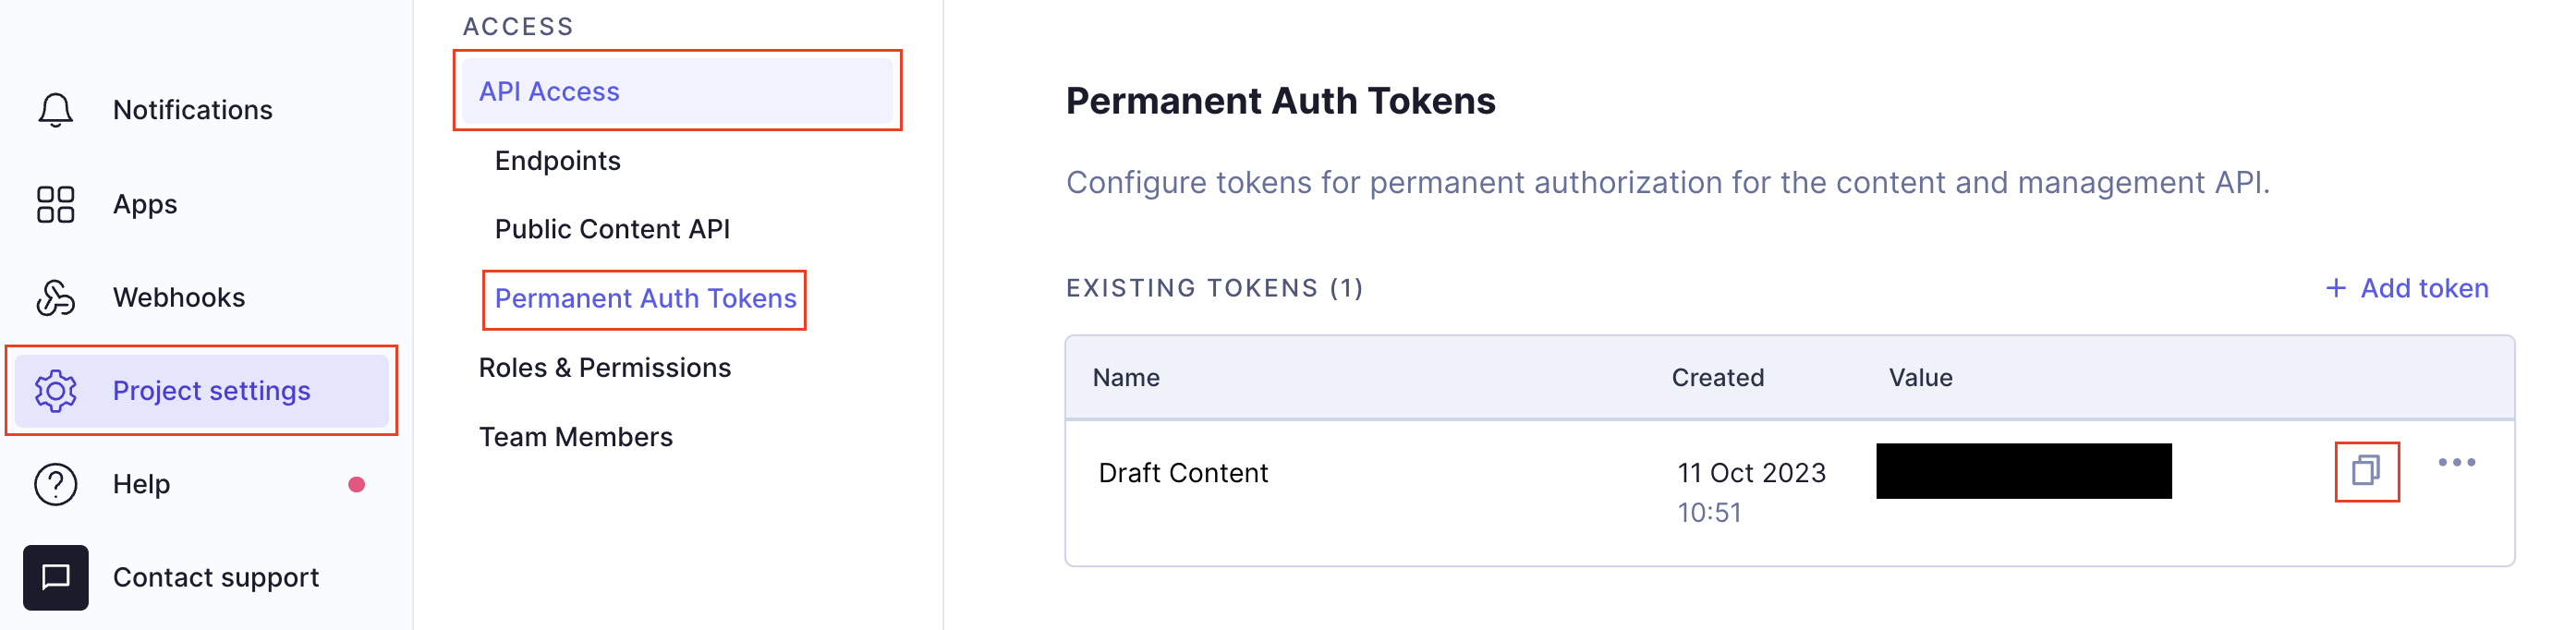 Copy the DRAFT content token